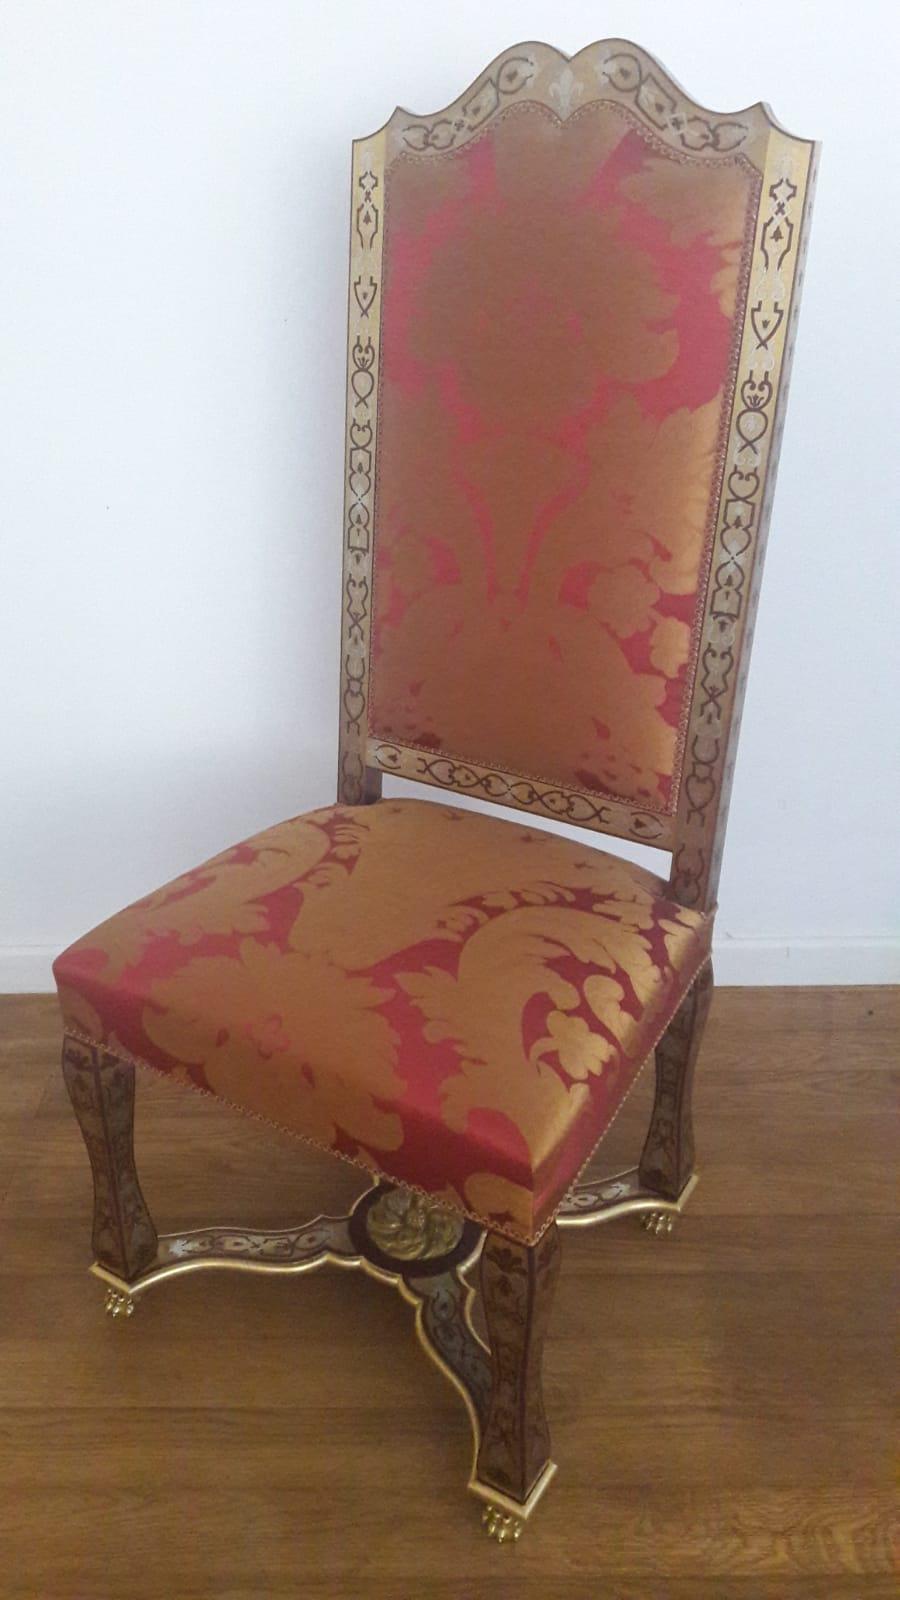 Unique pair of chairs, created and signed by one of the greatest French cabinet maker, Atelier BHC.
In 18th century style, inspired by a famous French Castle near Paris.
Amazing Boule Marquetry on hard wood, red silk, brass and gilt